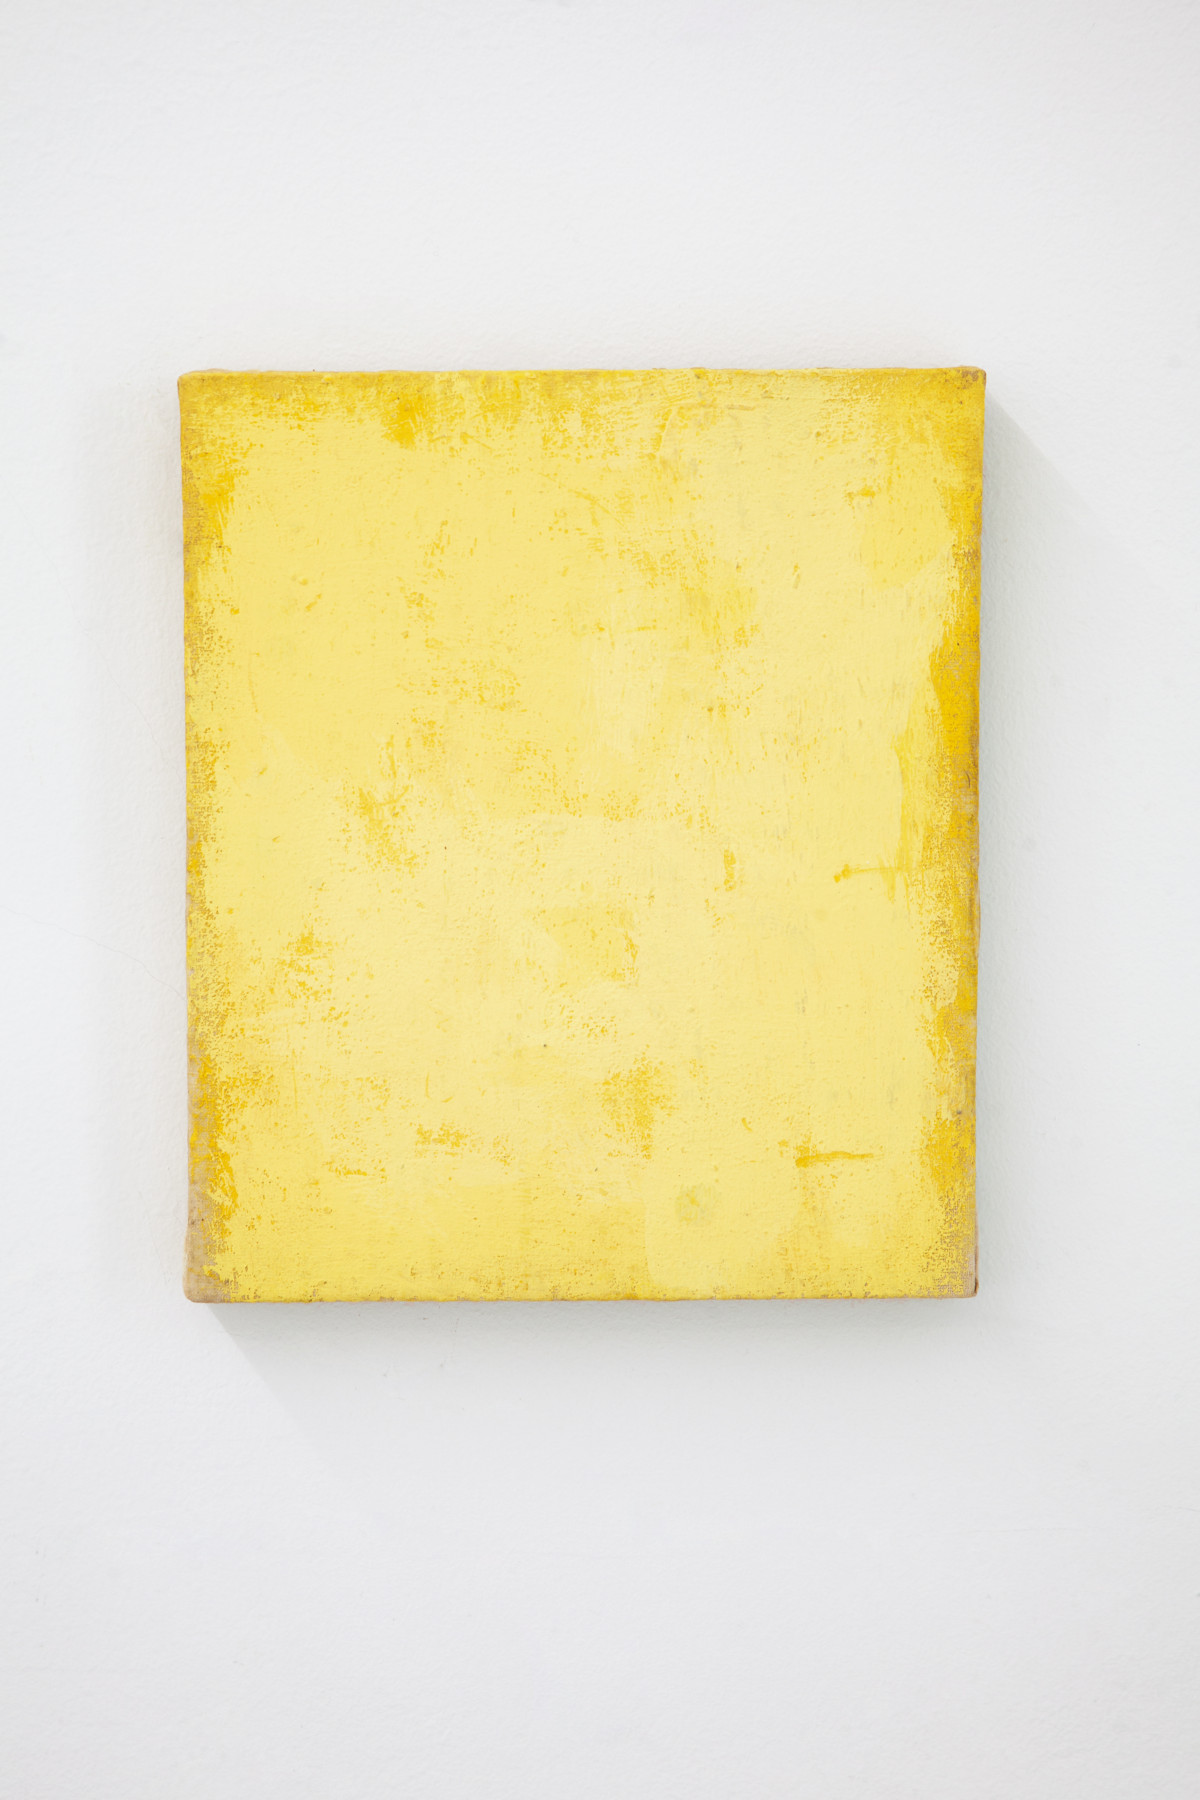 Lawrence Carroll, ‘Untitled’, 2010, oil, wax on canvas on wood